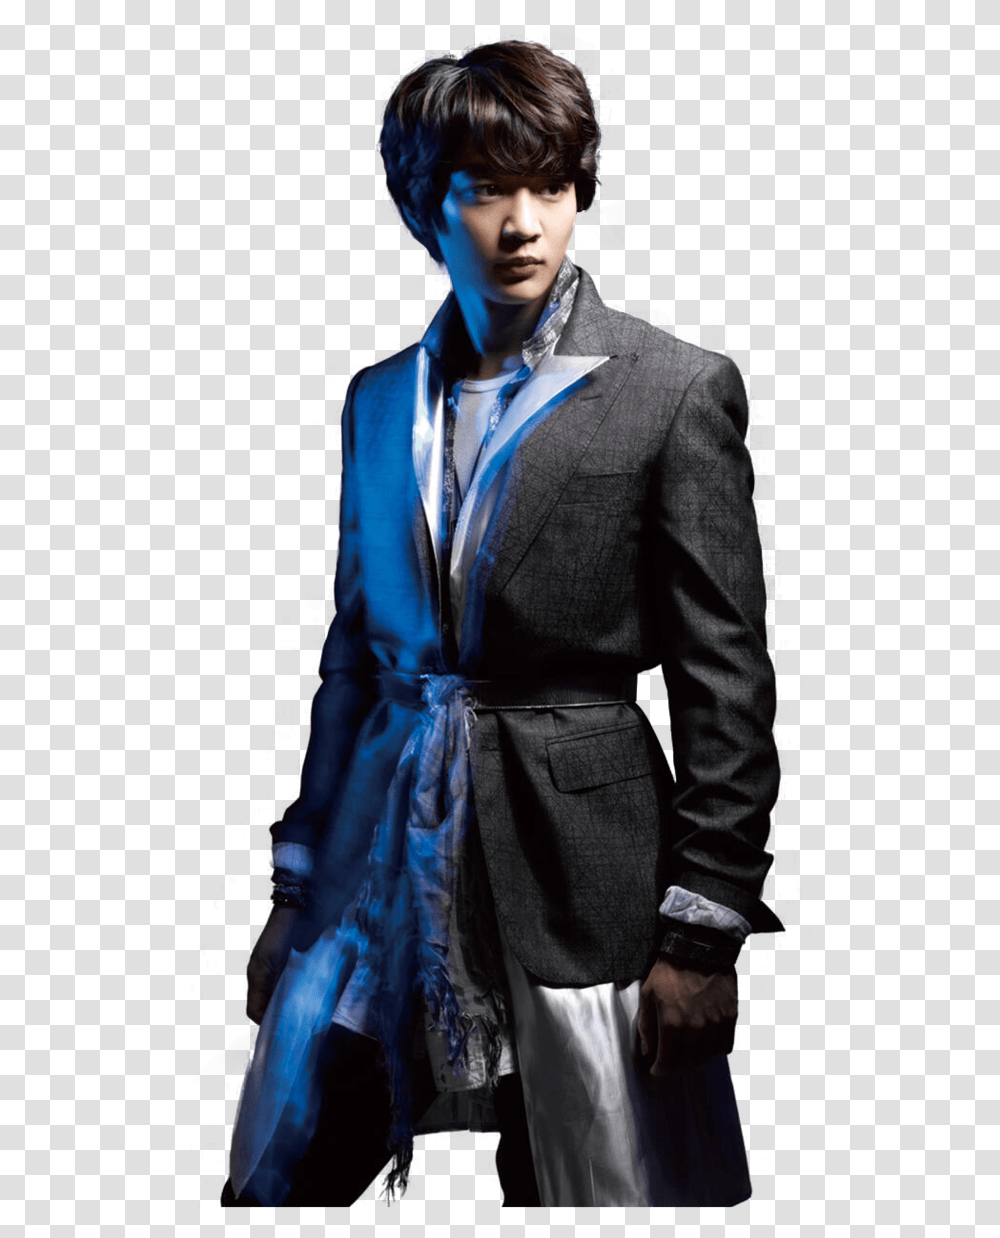 The Sexy Rapper Minho Shinee Icon, Suit, Overcoat, Tuxedo Transparent Png